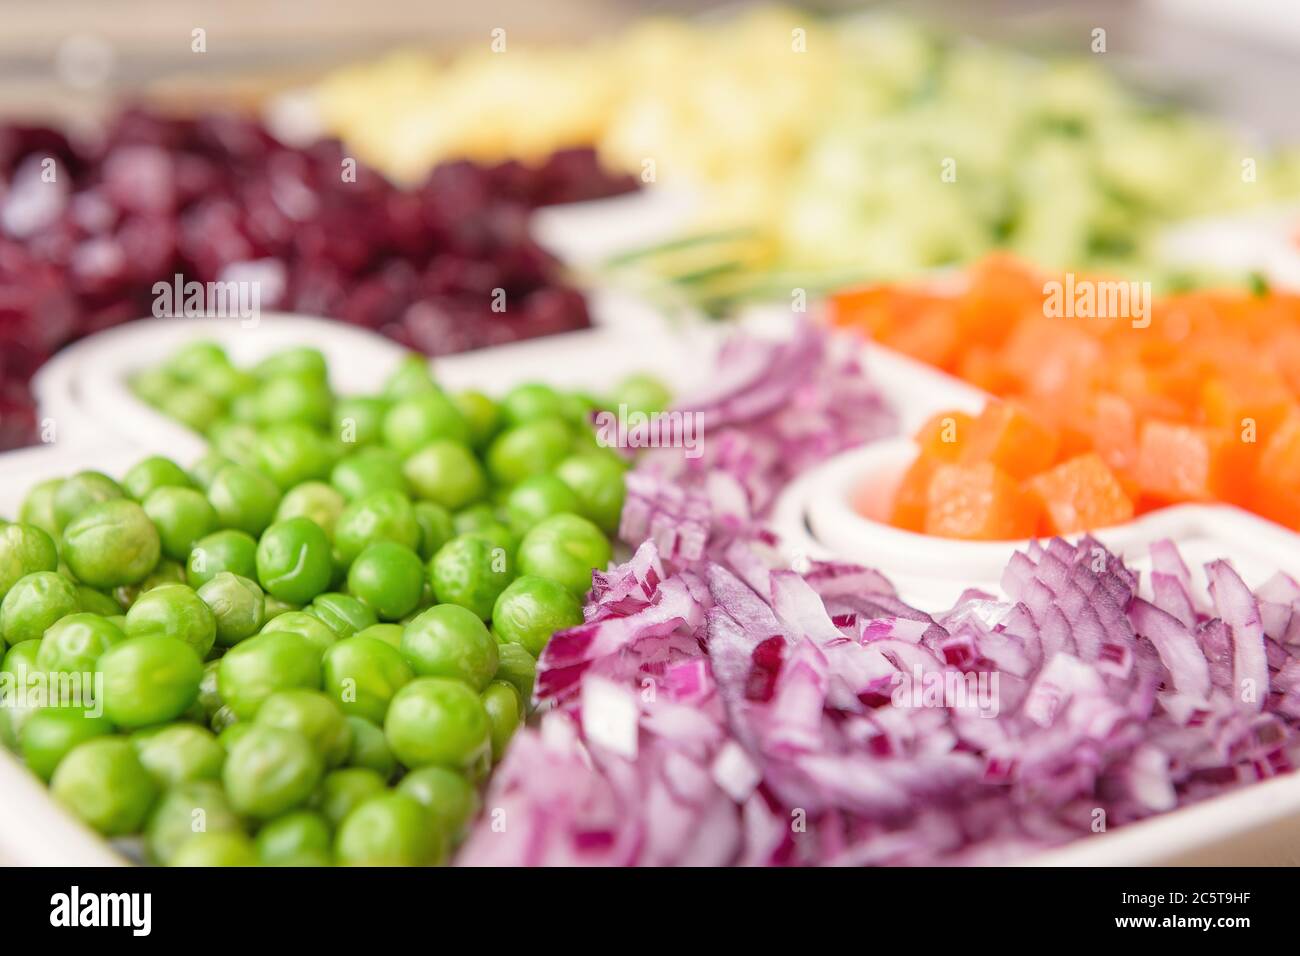 Delicious fresh pieces of vegetables of carrots, cucumber, potatoes, beets and peas close-up with fresh onion and olive oil on a bag cloth on a rustic Stock Photo